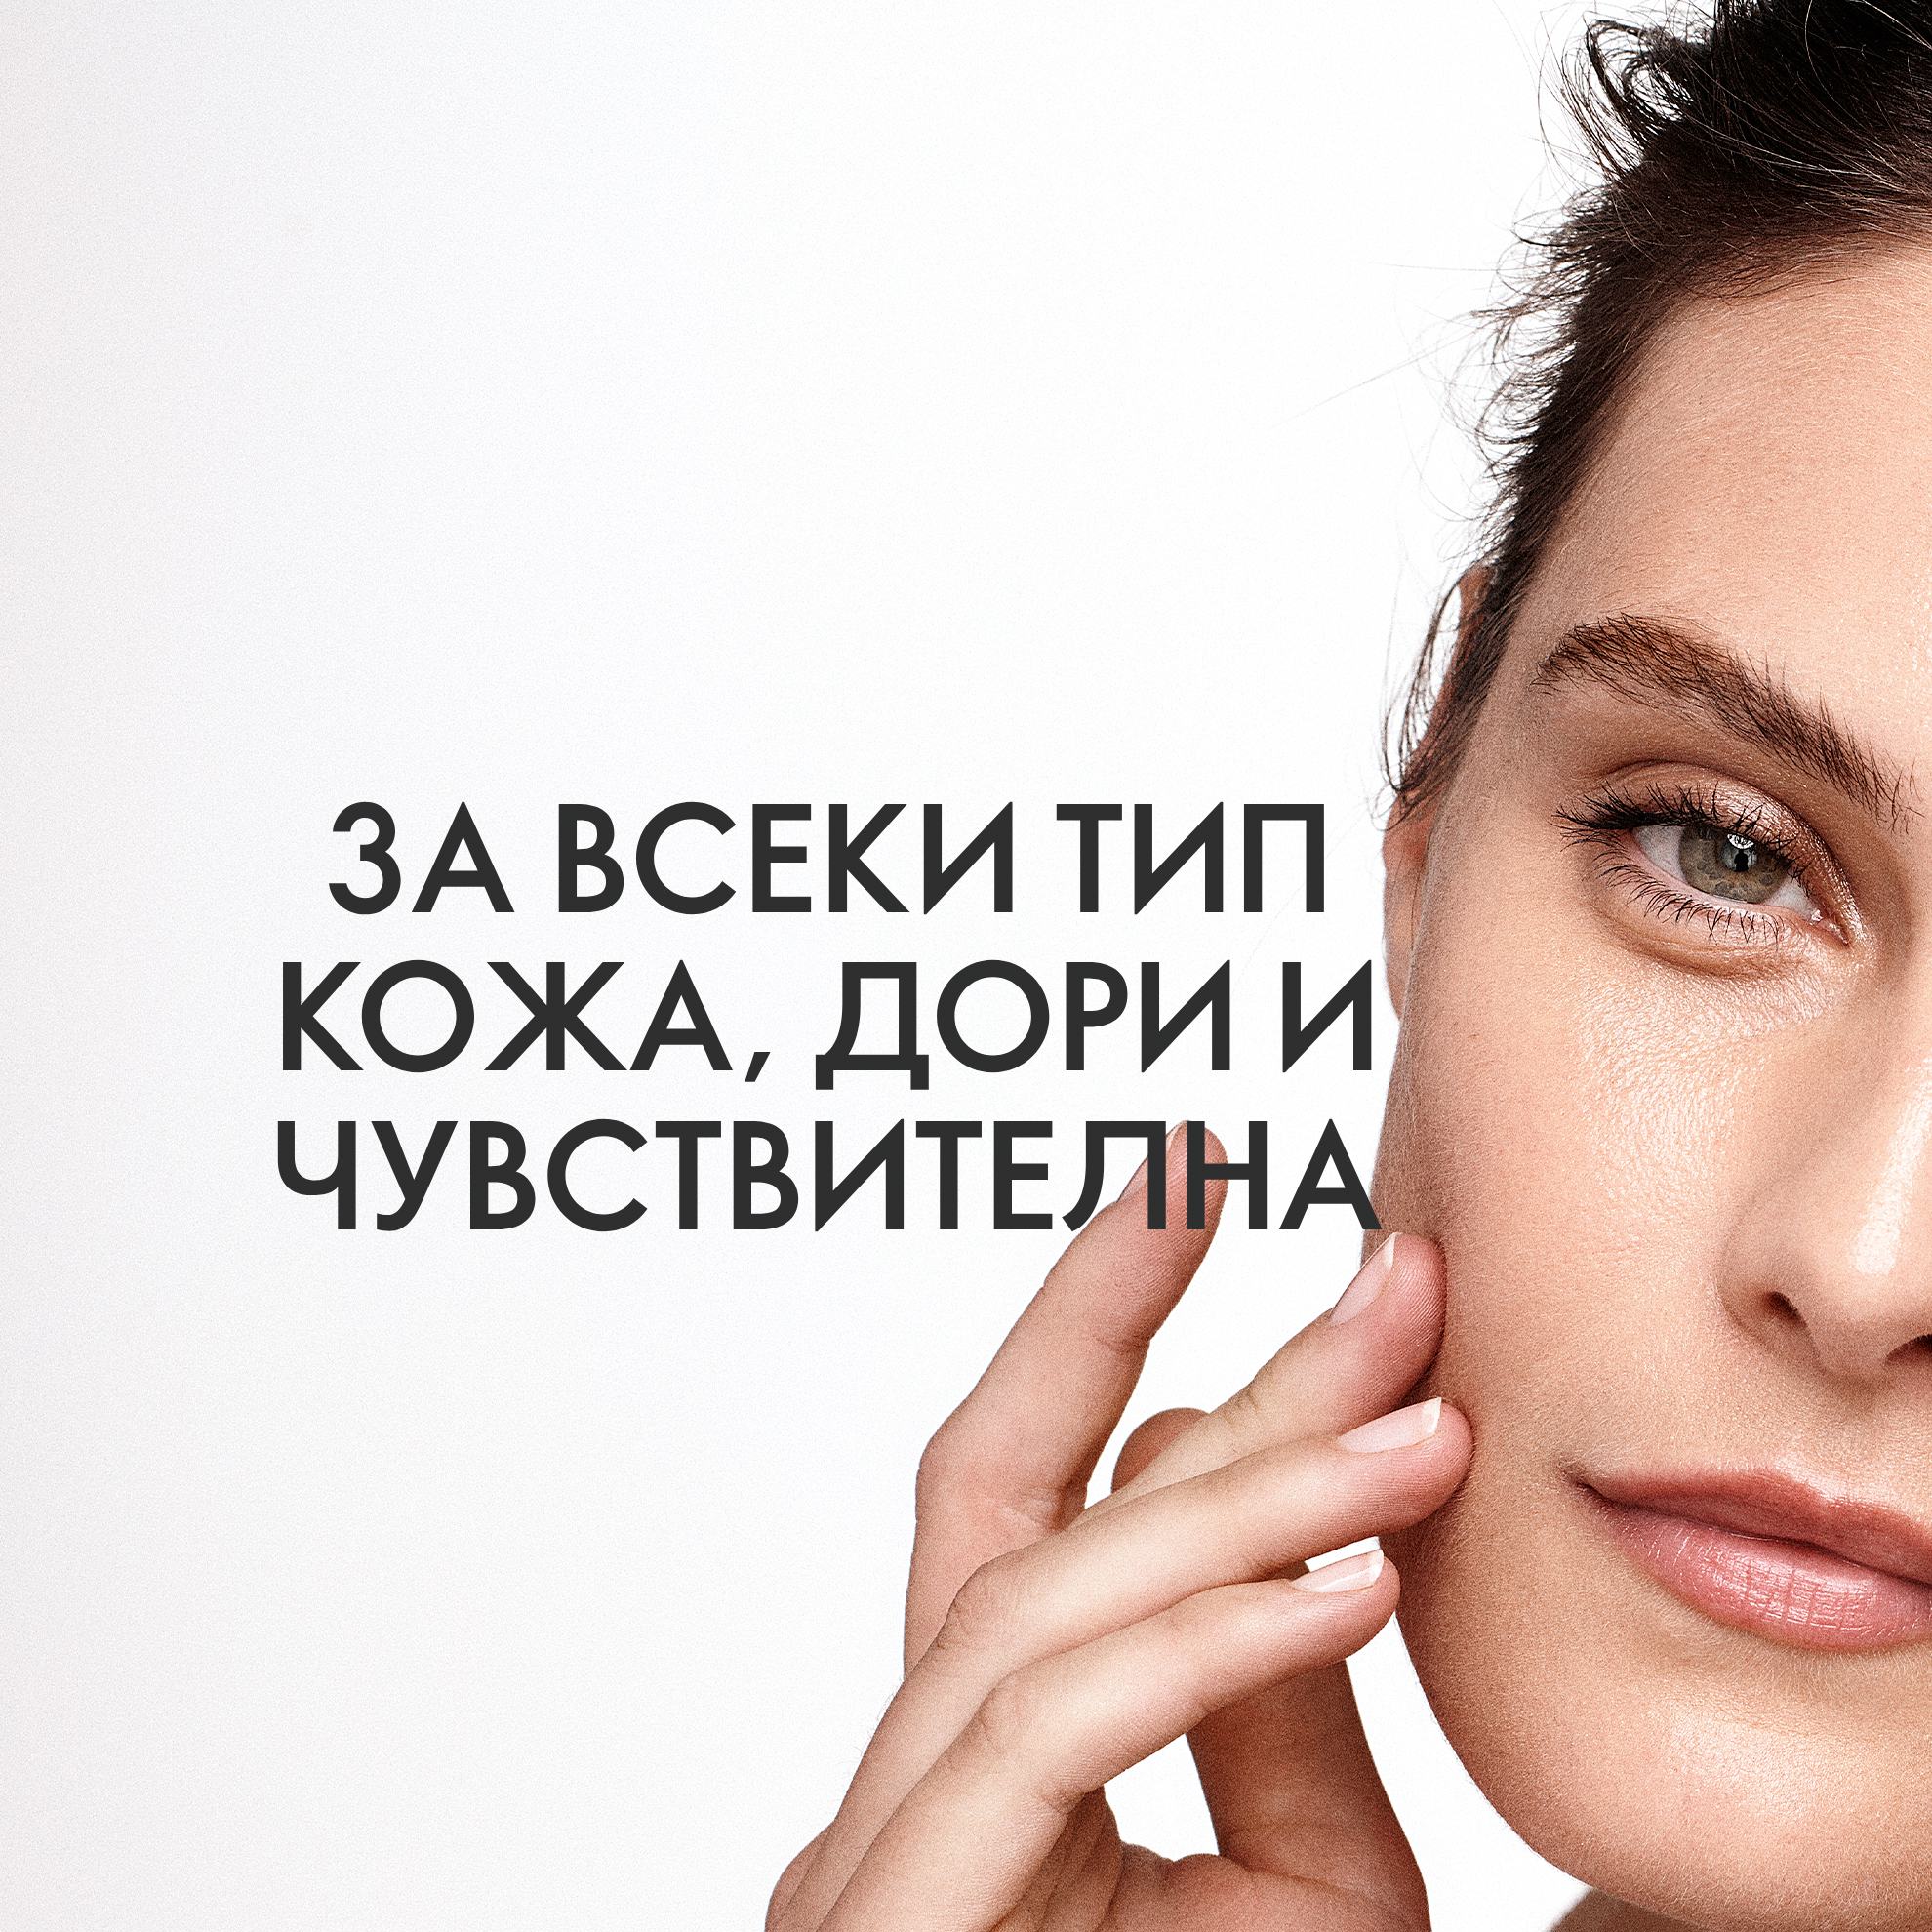 https://media-cdn.oriflame.com/productImage?externalMediaId=product-management-media%2fProducts%2f44387%2fBG%2f44387_6.png&id=16420794&version=1